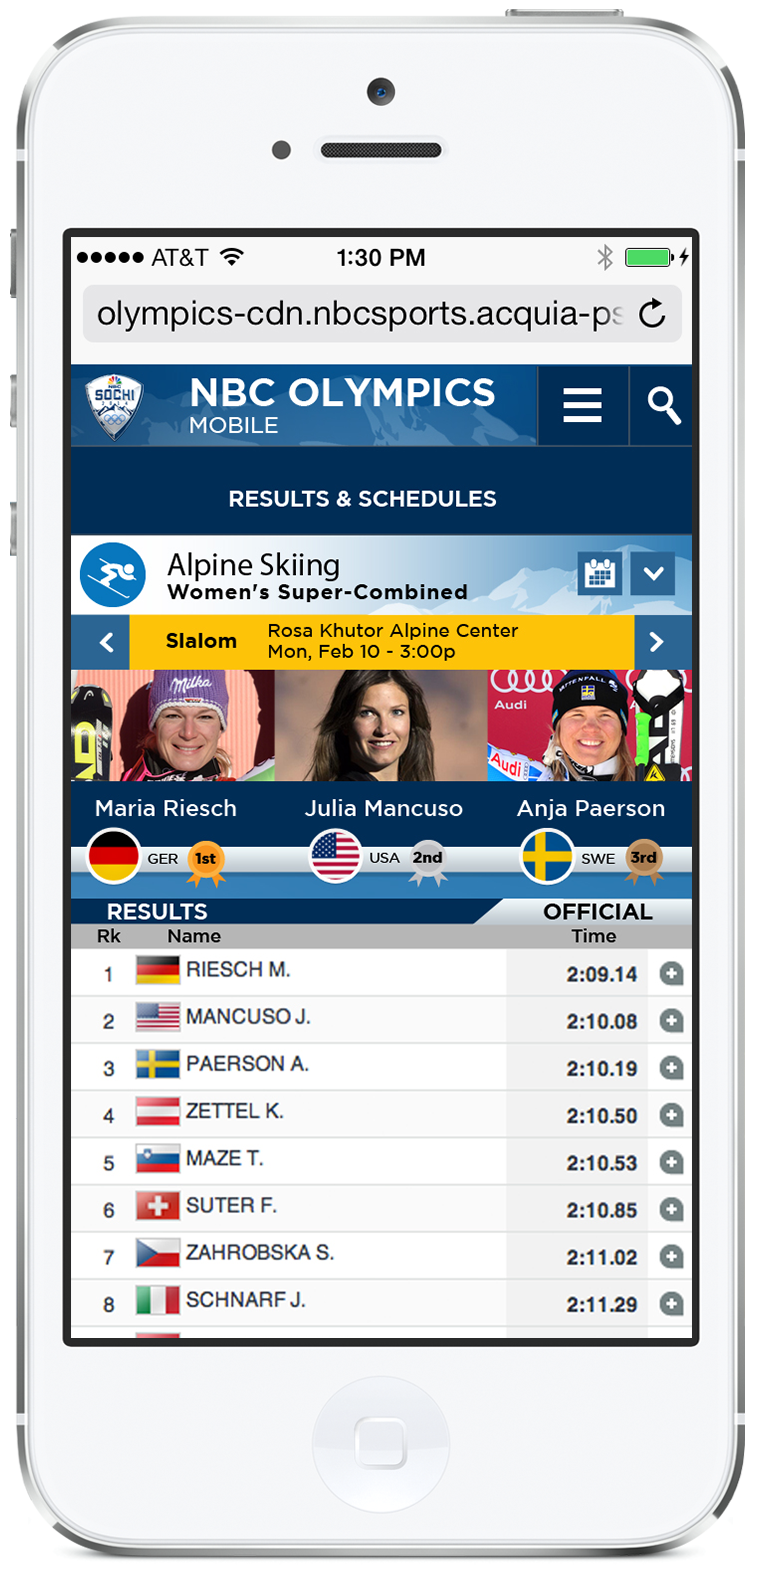 mobile nbc Olympics sochi Russia iphone Layout graphic design gold style guides